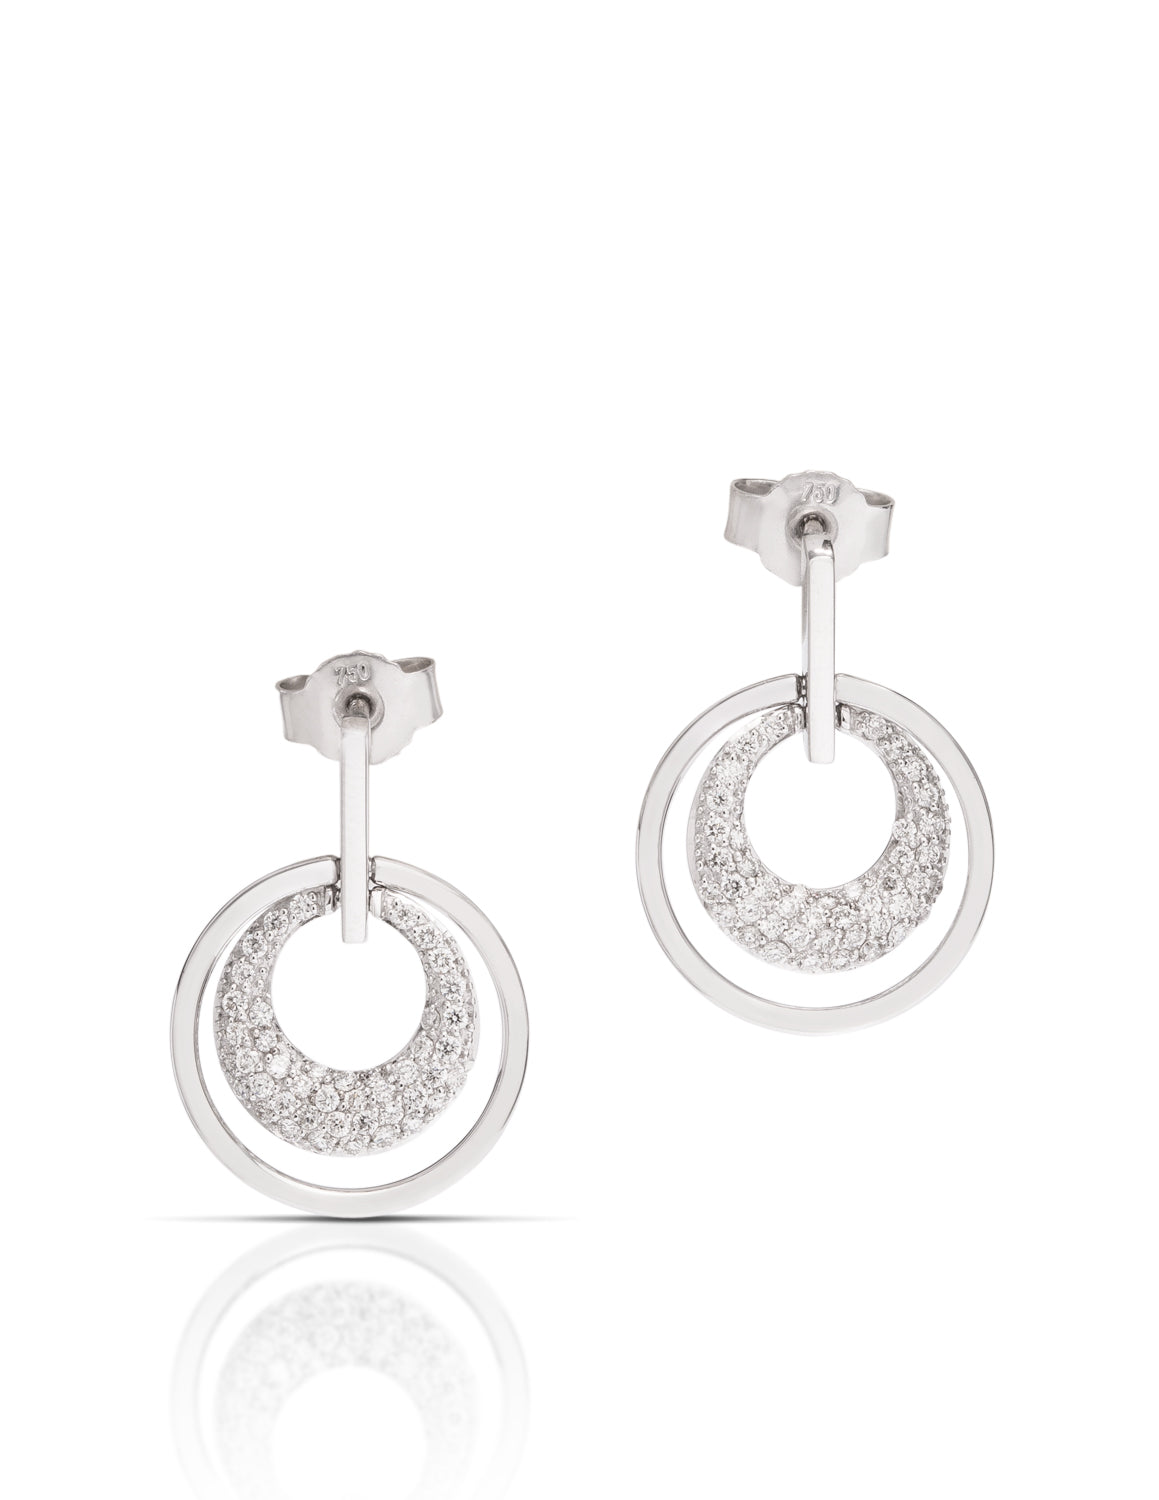 Double Circle Pave Earring - Charles Koll Jewellers